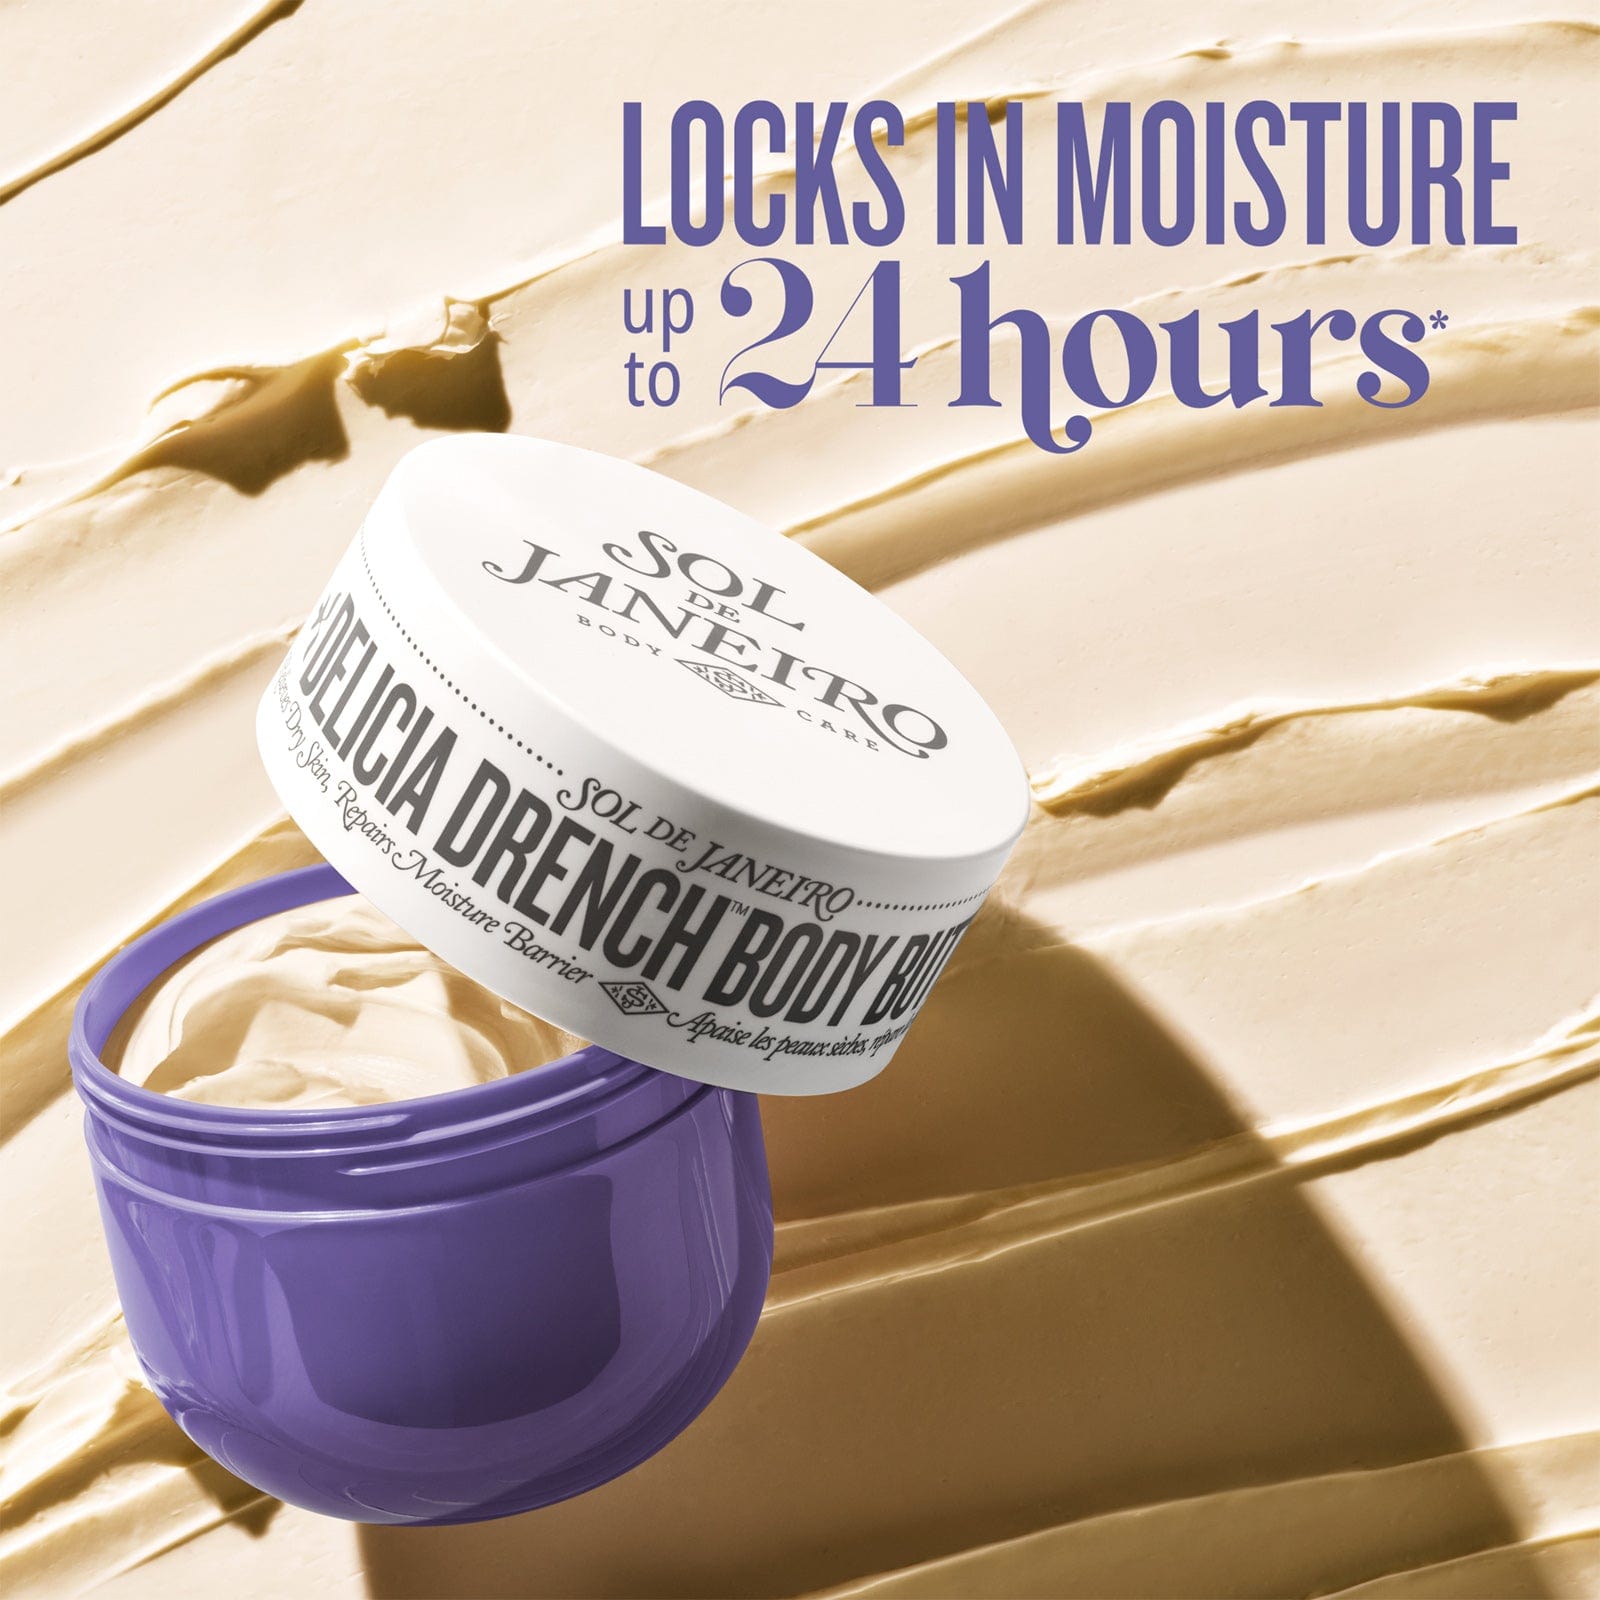 Locks in Moisture up to 24 hours - Delícia Drench Body Butter | Sol de Janeiro